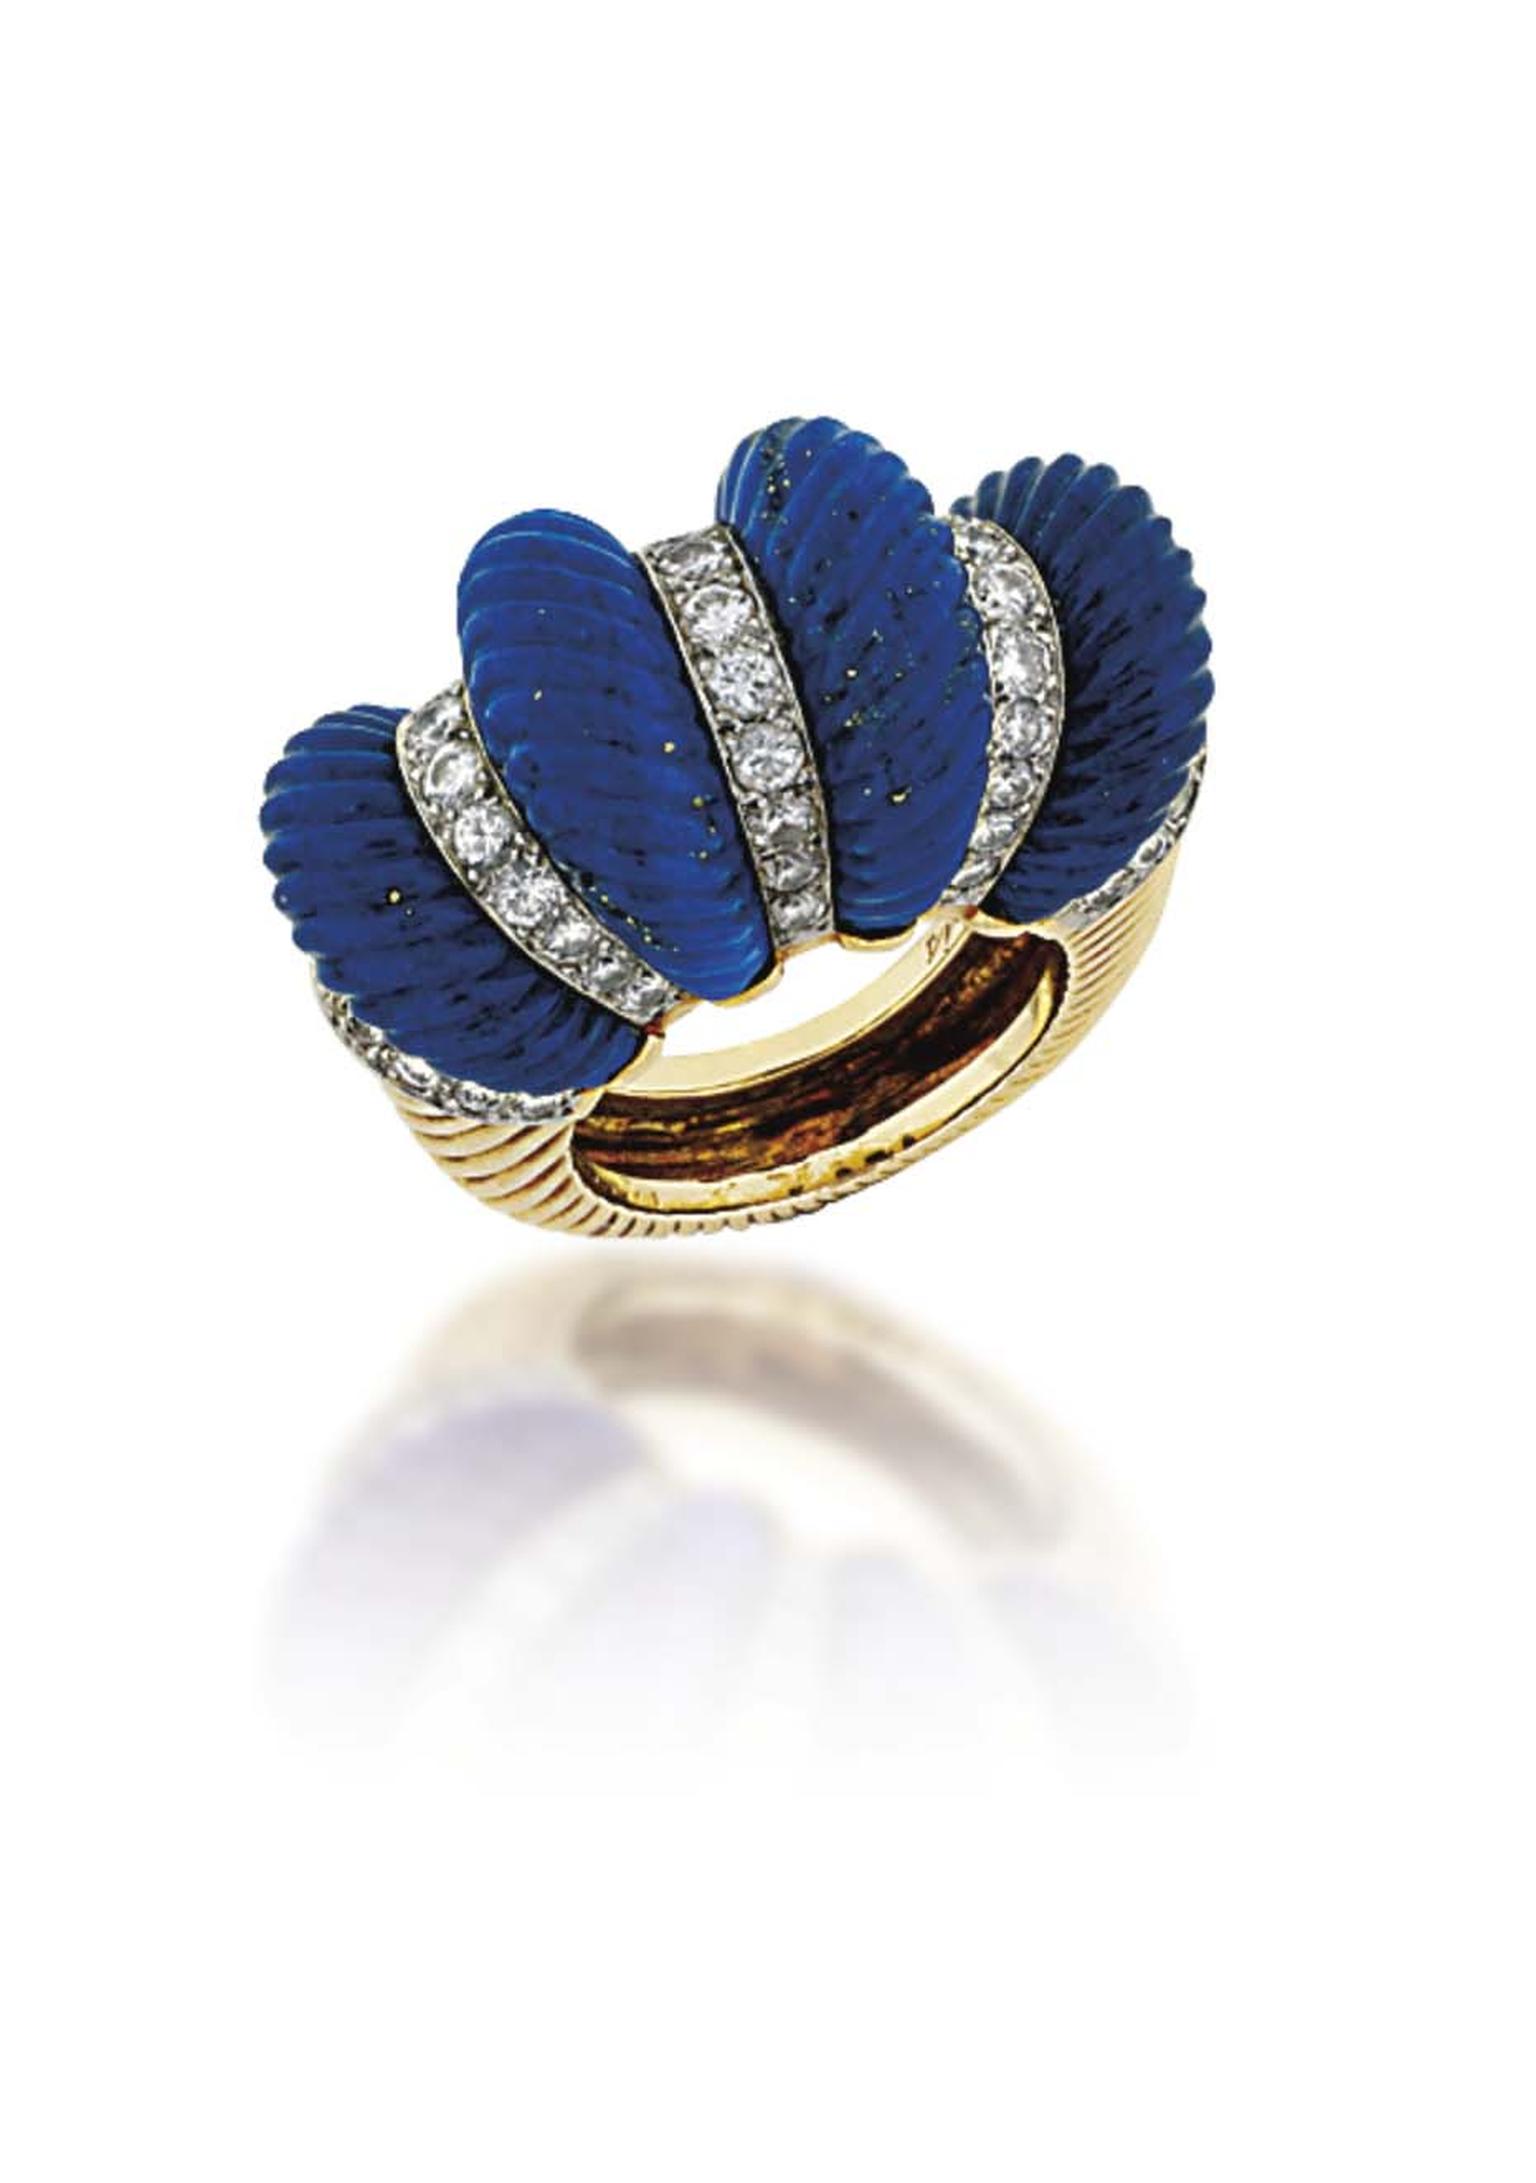 Lot 203, a Cartier lapis lazuli ring, is striking for its Art Deco simplicity (estimate: £8,000-10,000). Christie's Important Jewels Sale on 26 November at King Street in London.